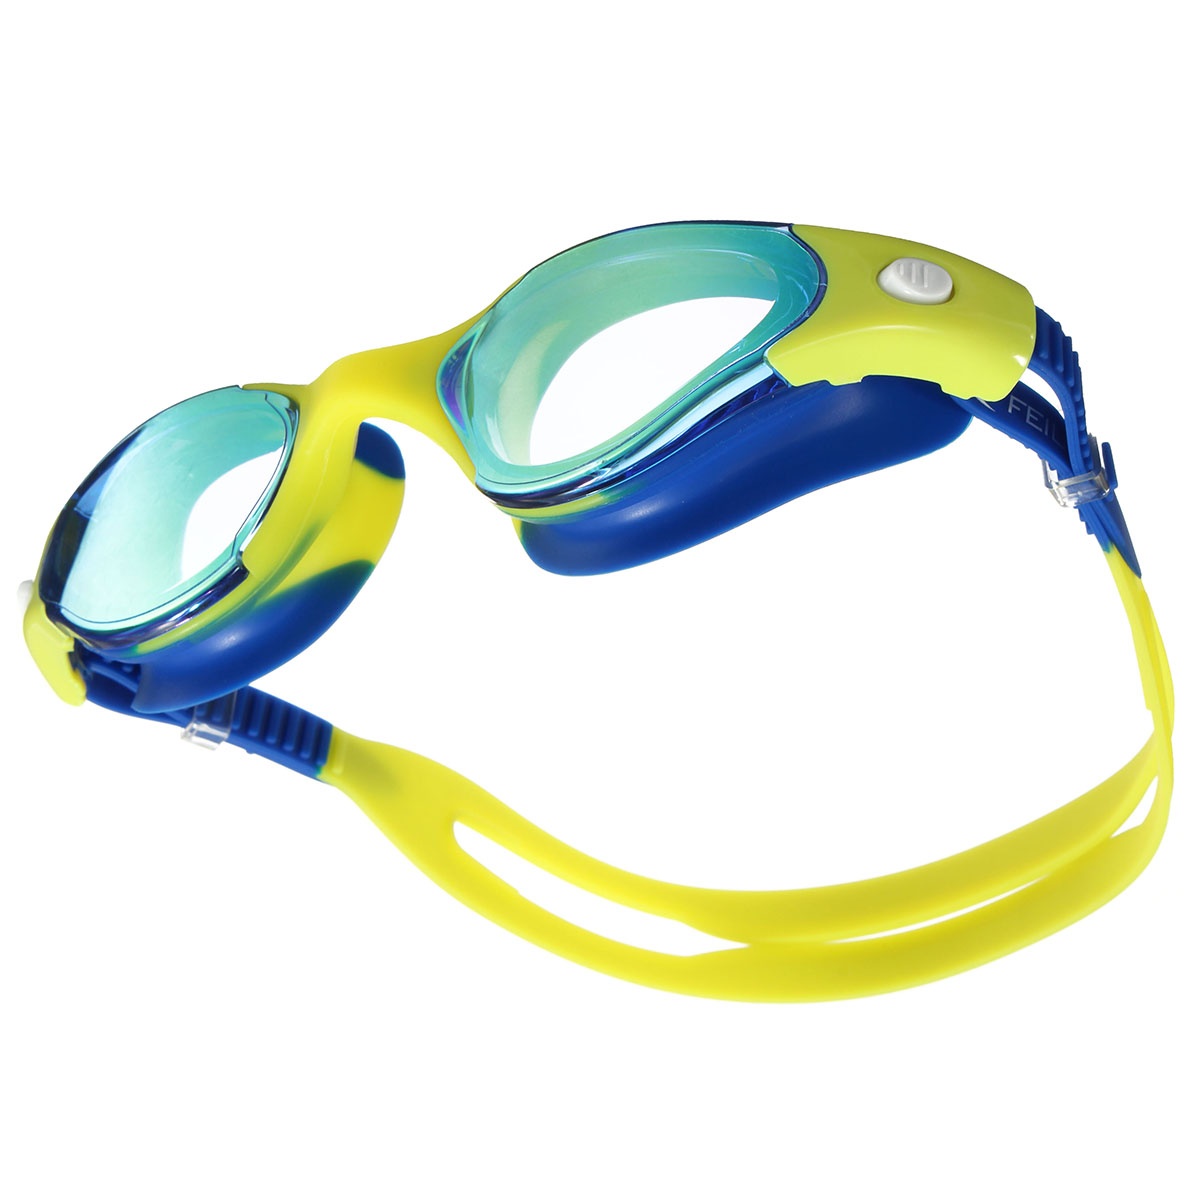 OUTERDO-Anti-Fog-UV-Protection-Swimming-Goggles-with-Silicone-Soft-Earplugs-Waterproof-Goggles-for-A-1886112-3